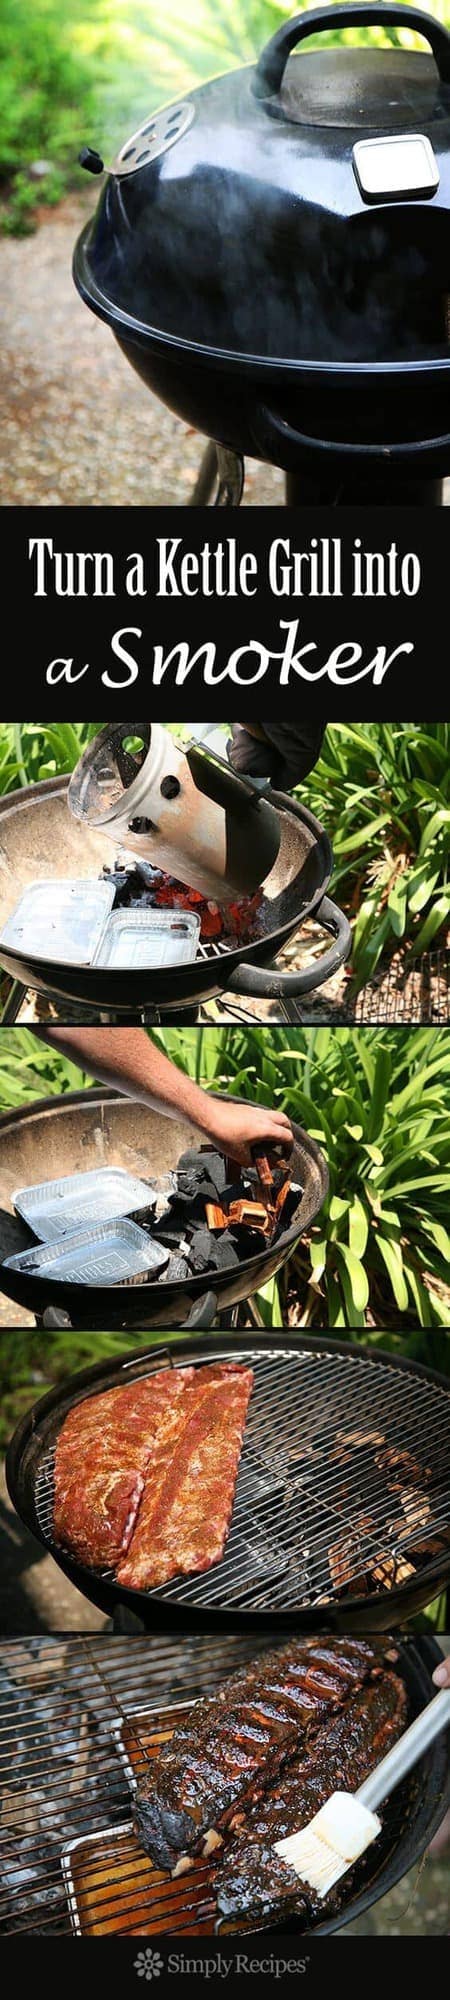 How to Turn Your Kettle Grill Into a Smoker | SImply Recipes